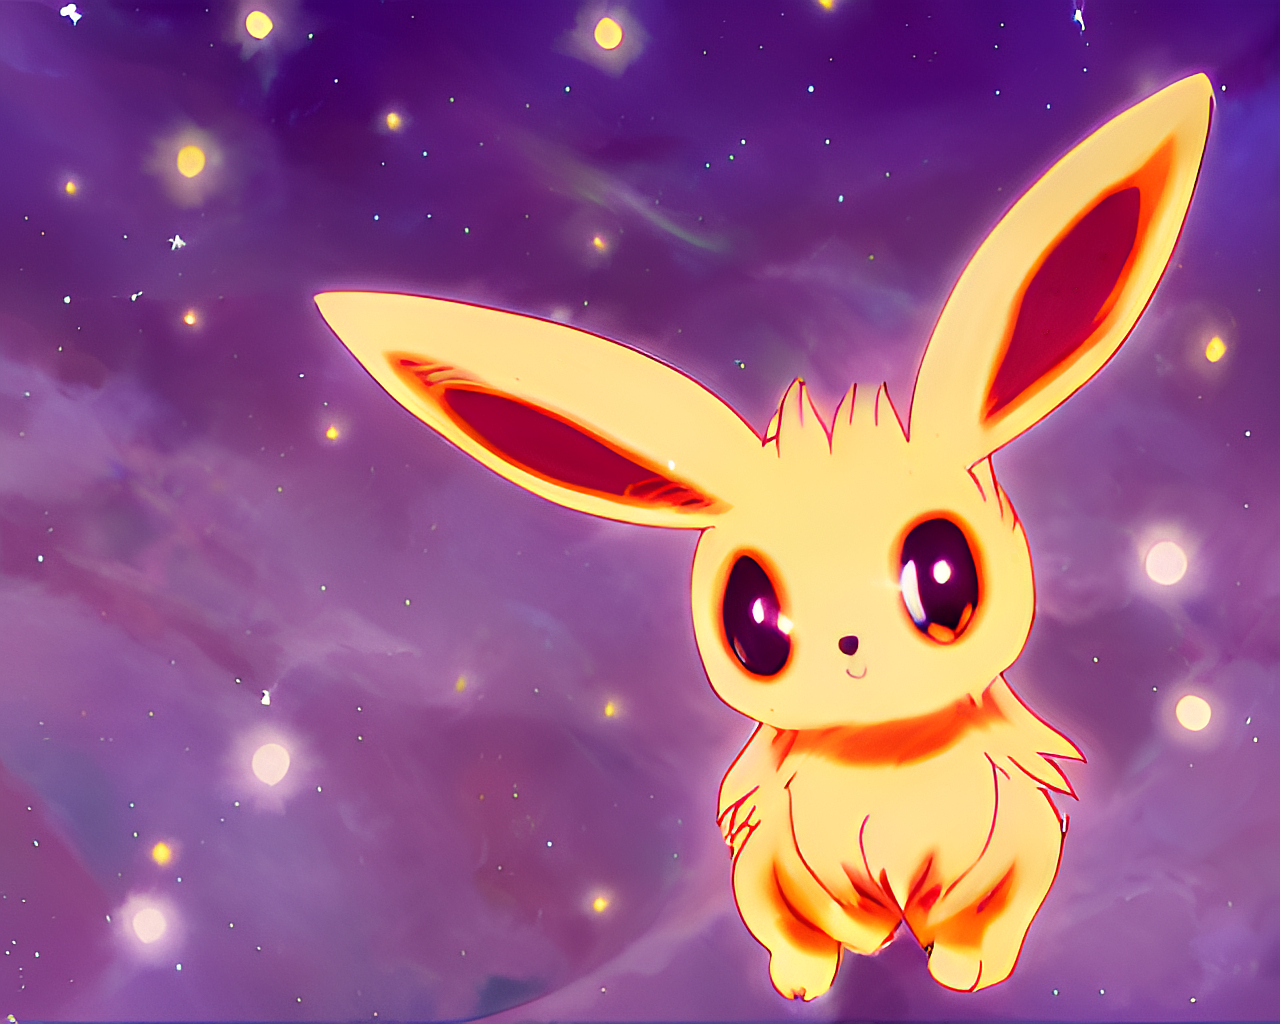 Eevee in Space (Stable Diffusion) by SuperJedi224 on DeviantArt